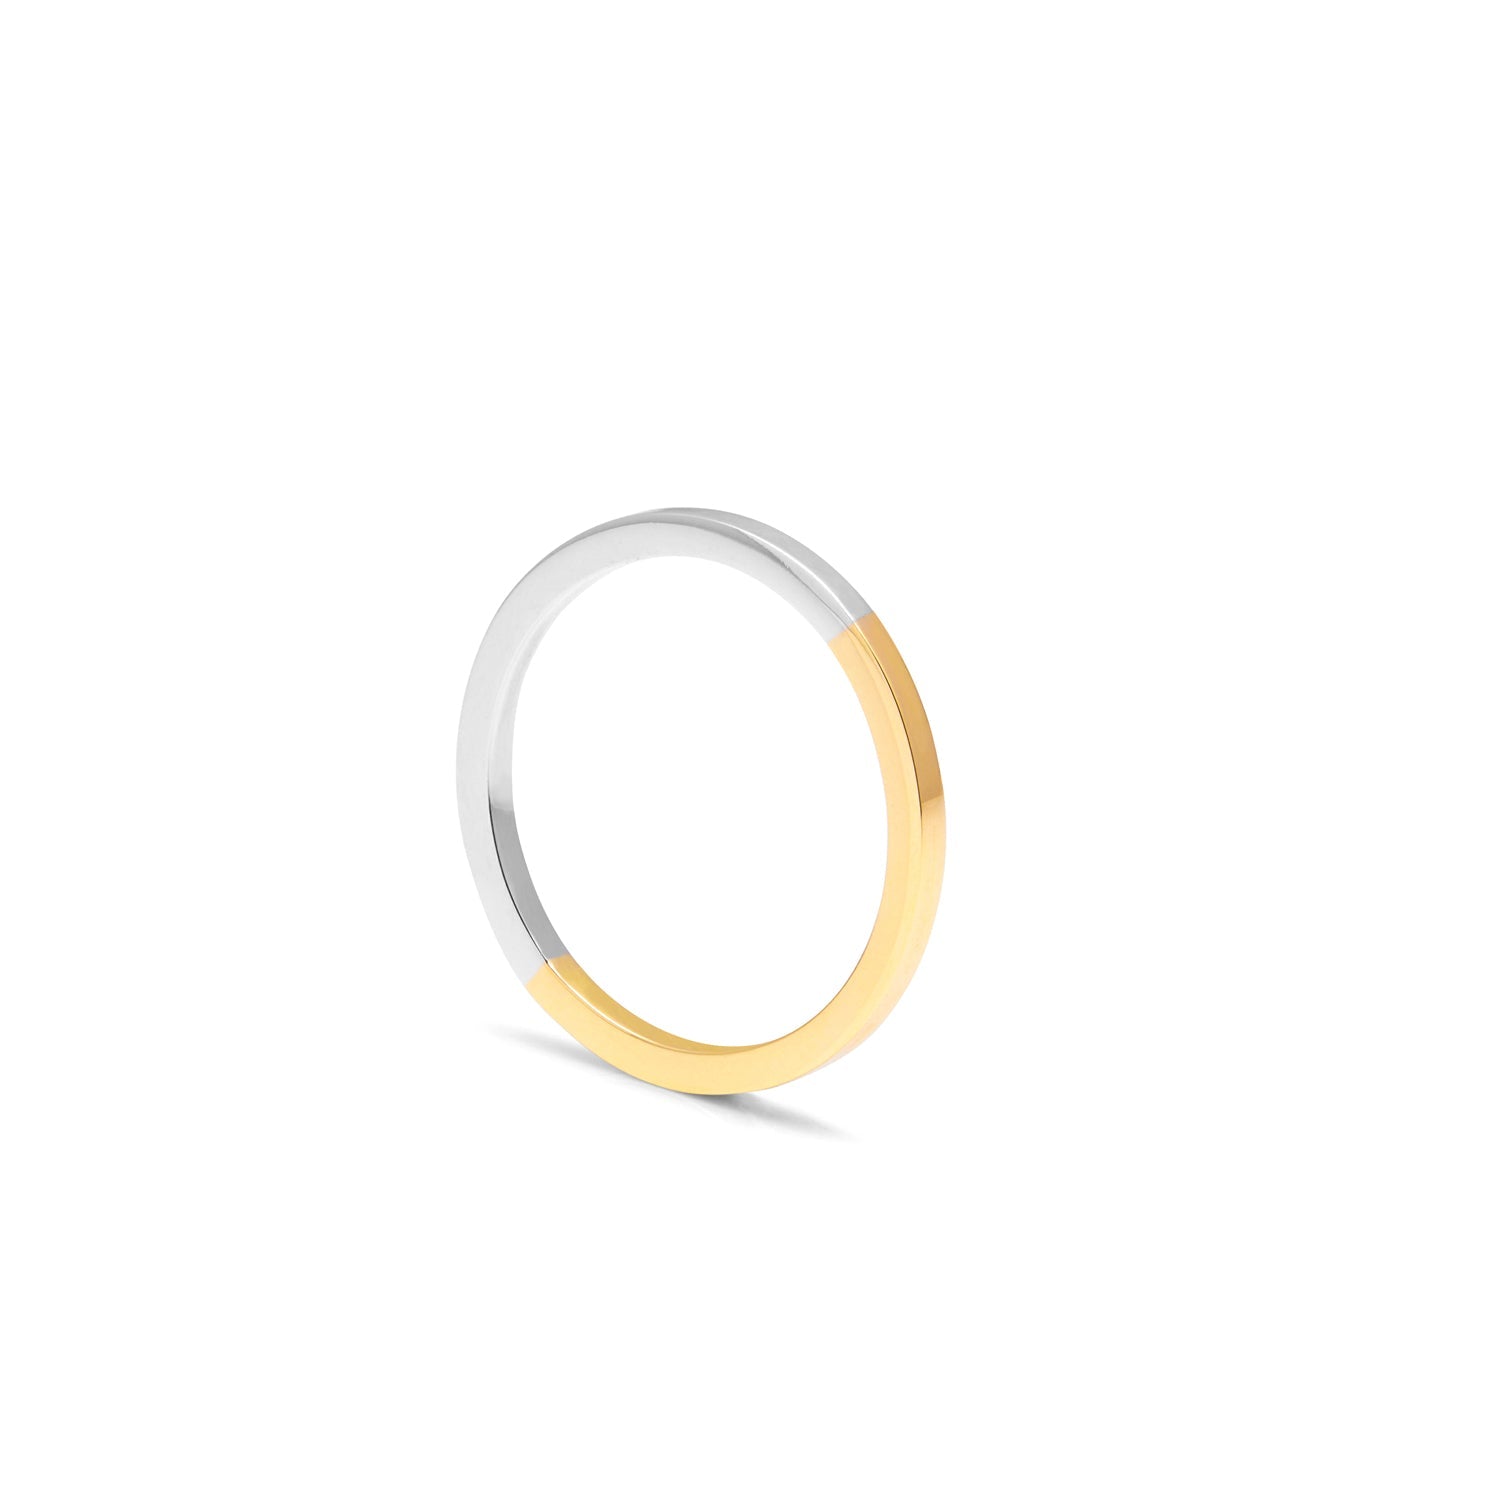 Two-tone Square Ring - 9k Yellow & White Gold - Myia Bonner Jewellery